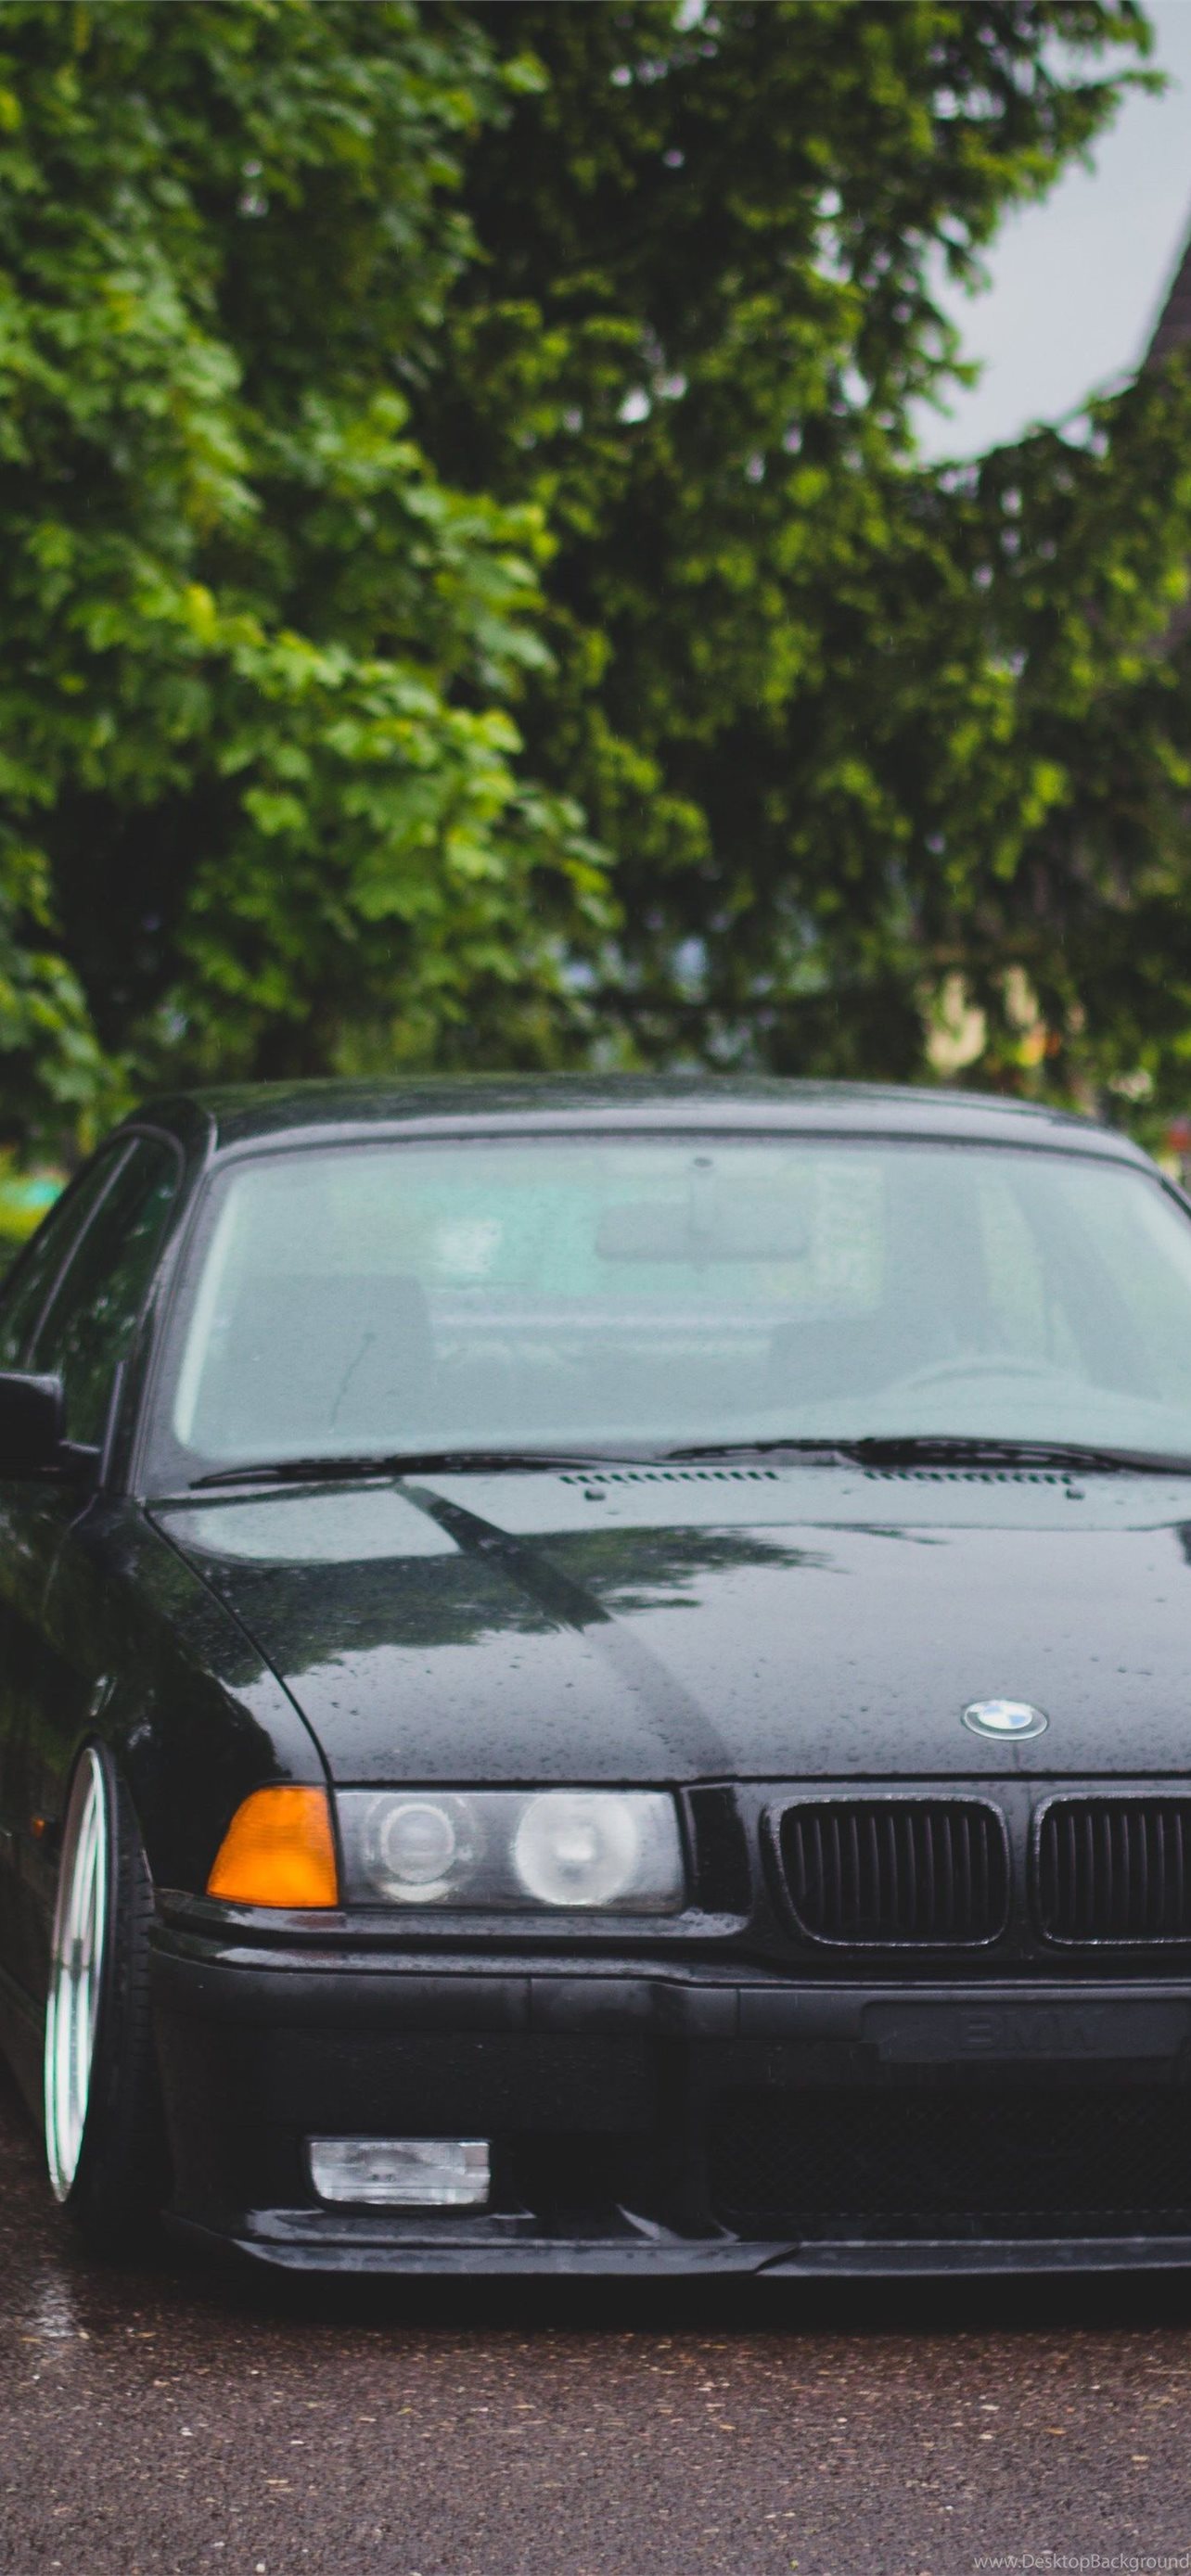 bmw e36 iPhone Wallpaper Free Download